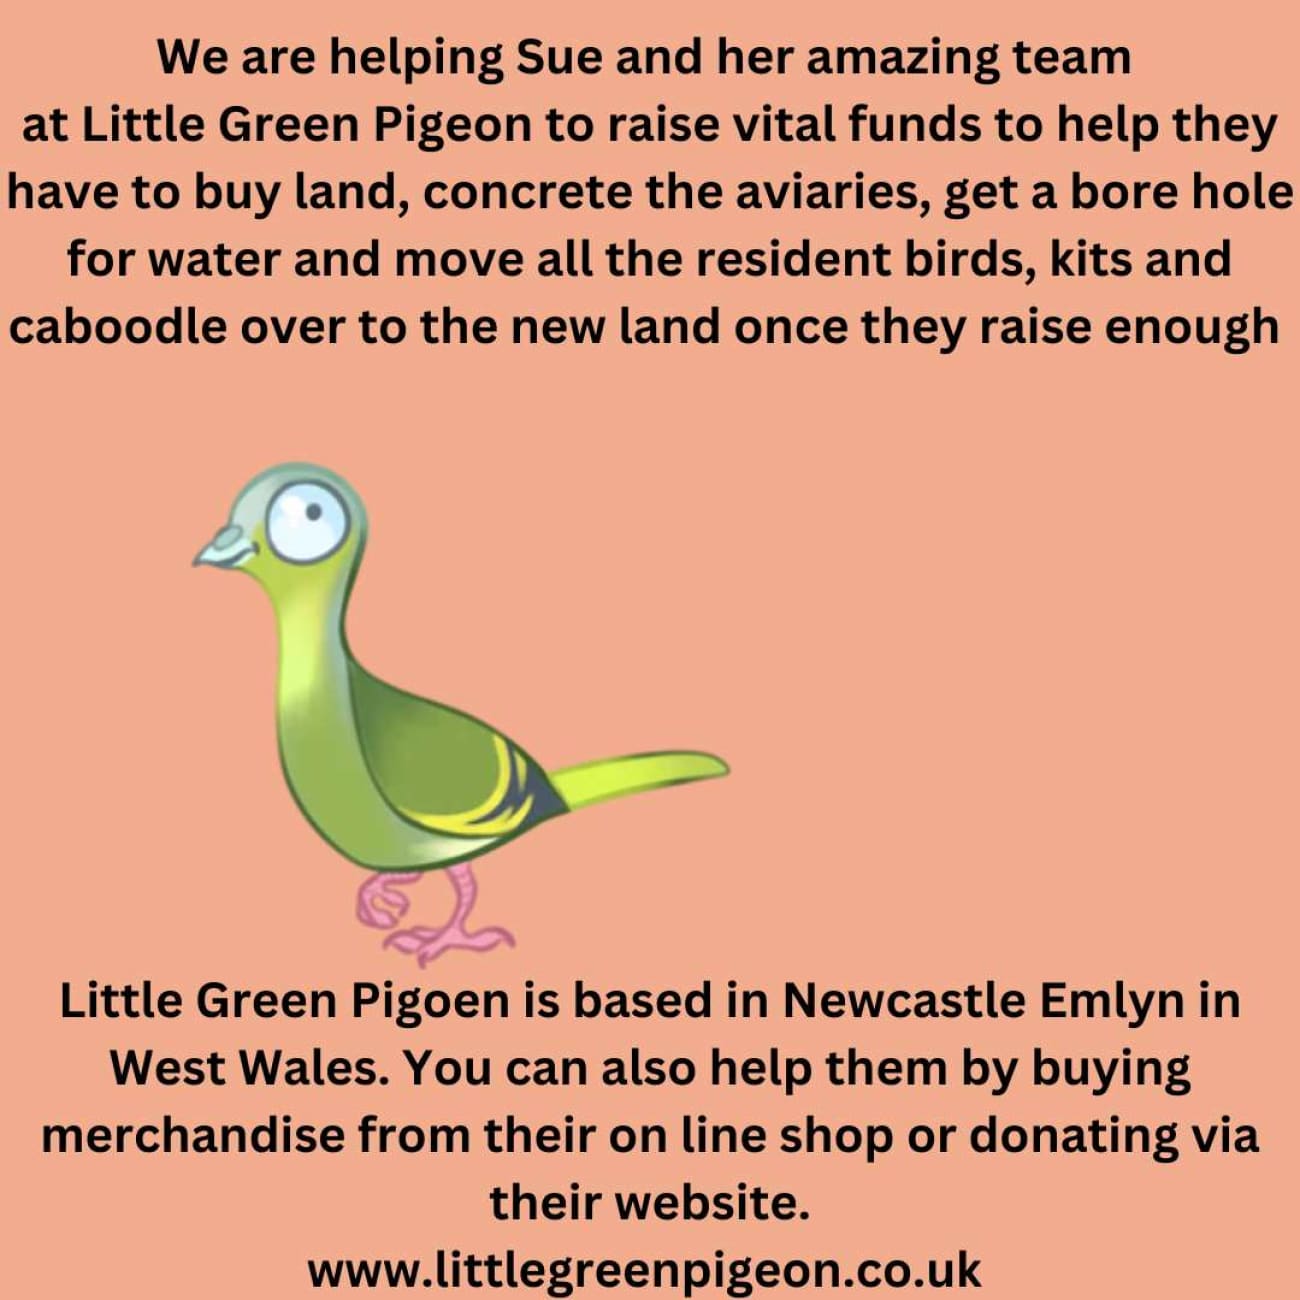 Win a pamper box raffle in aid of Little Green Pigeon - All